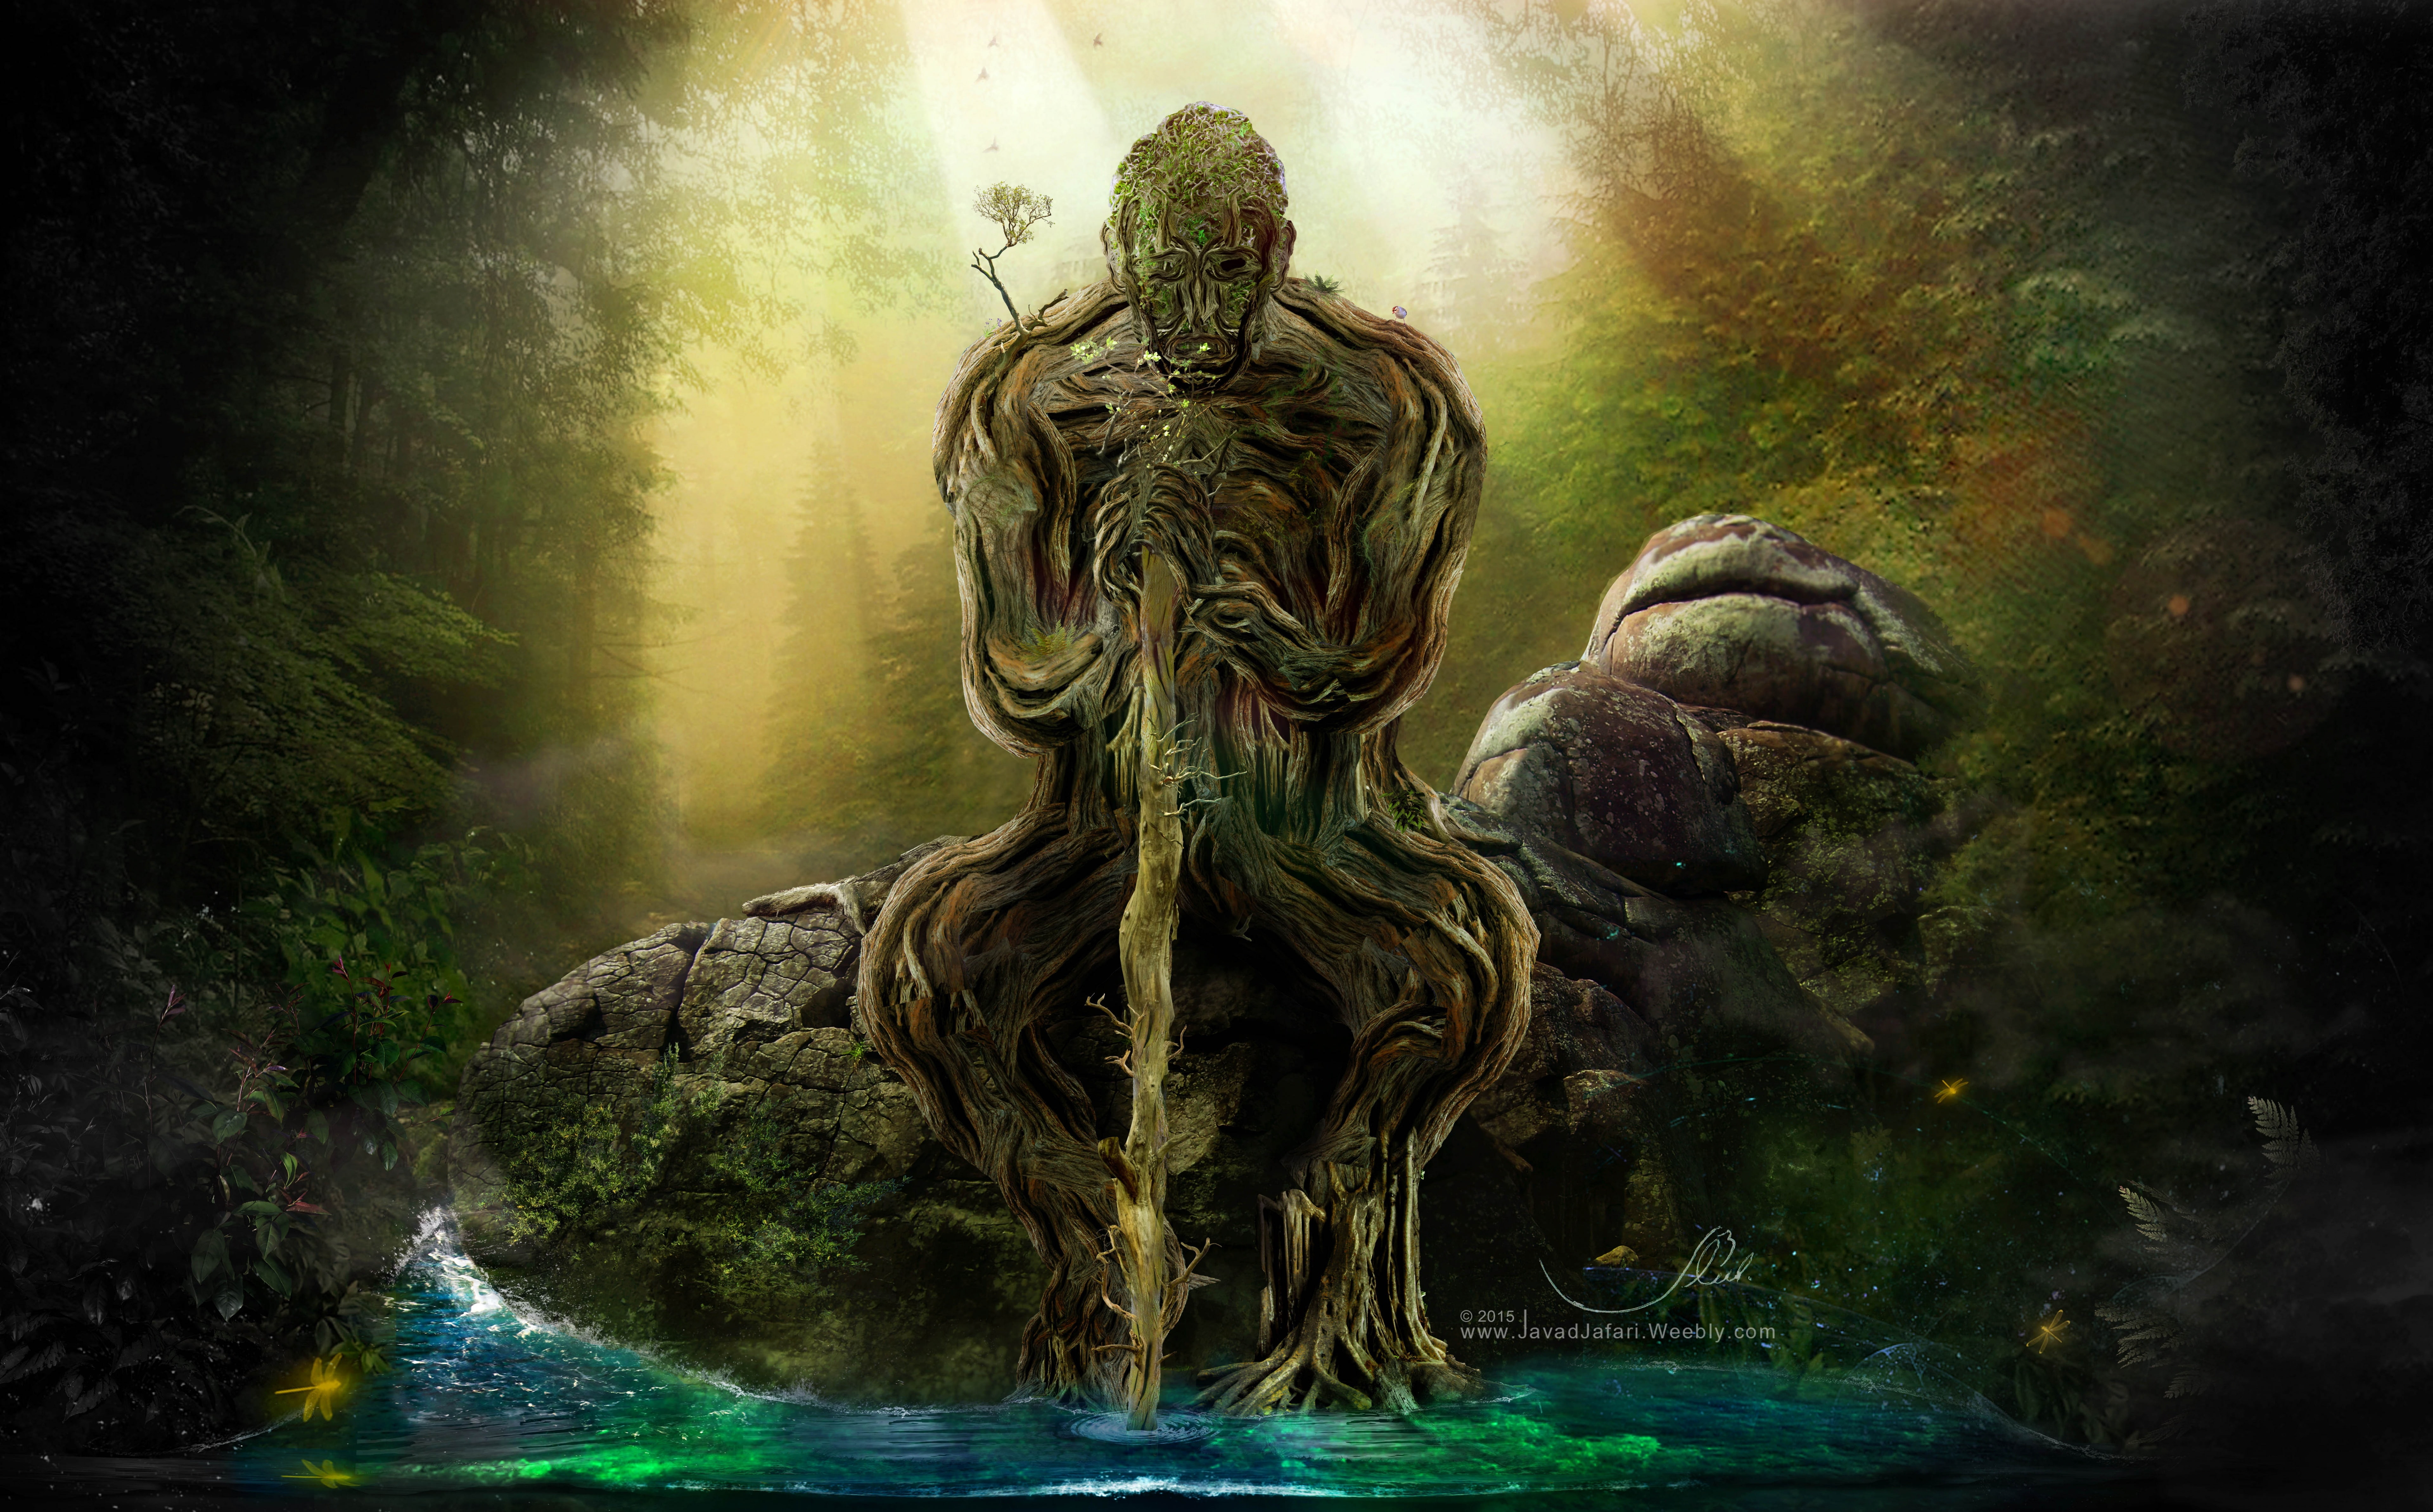 The Old Tree HD Wallpaper, male profile game wallpaper, Artistic